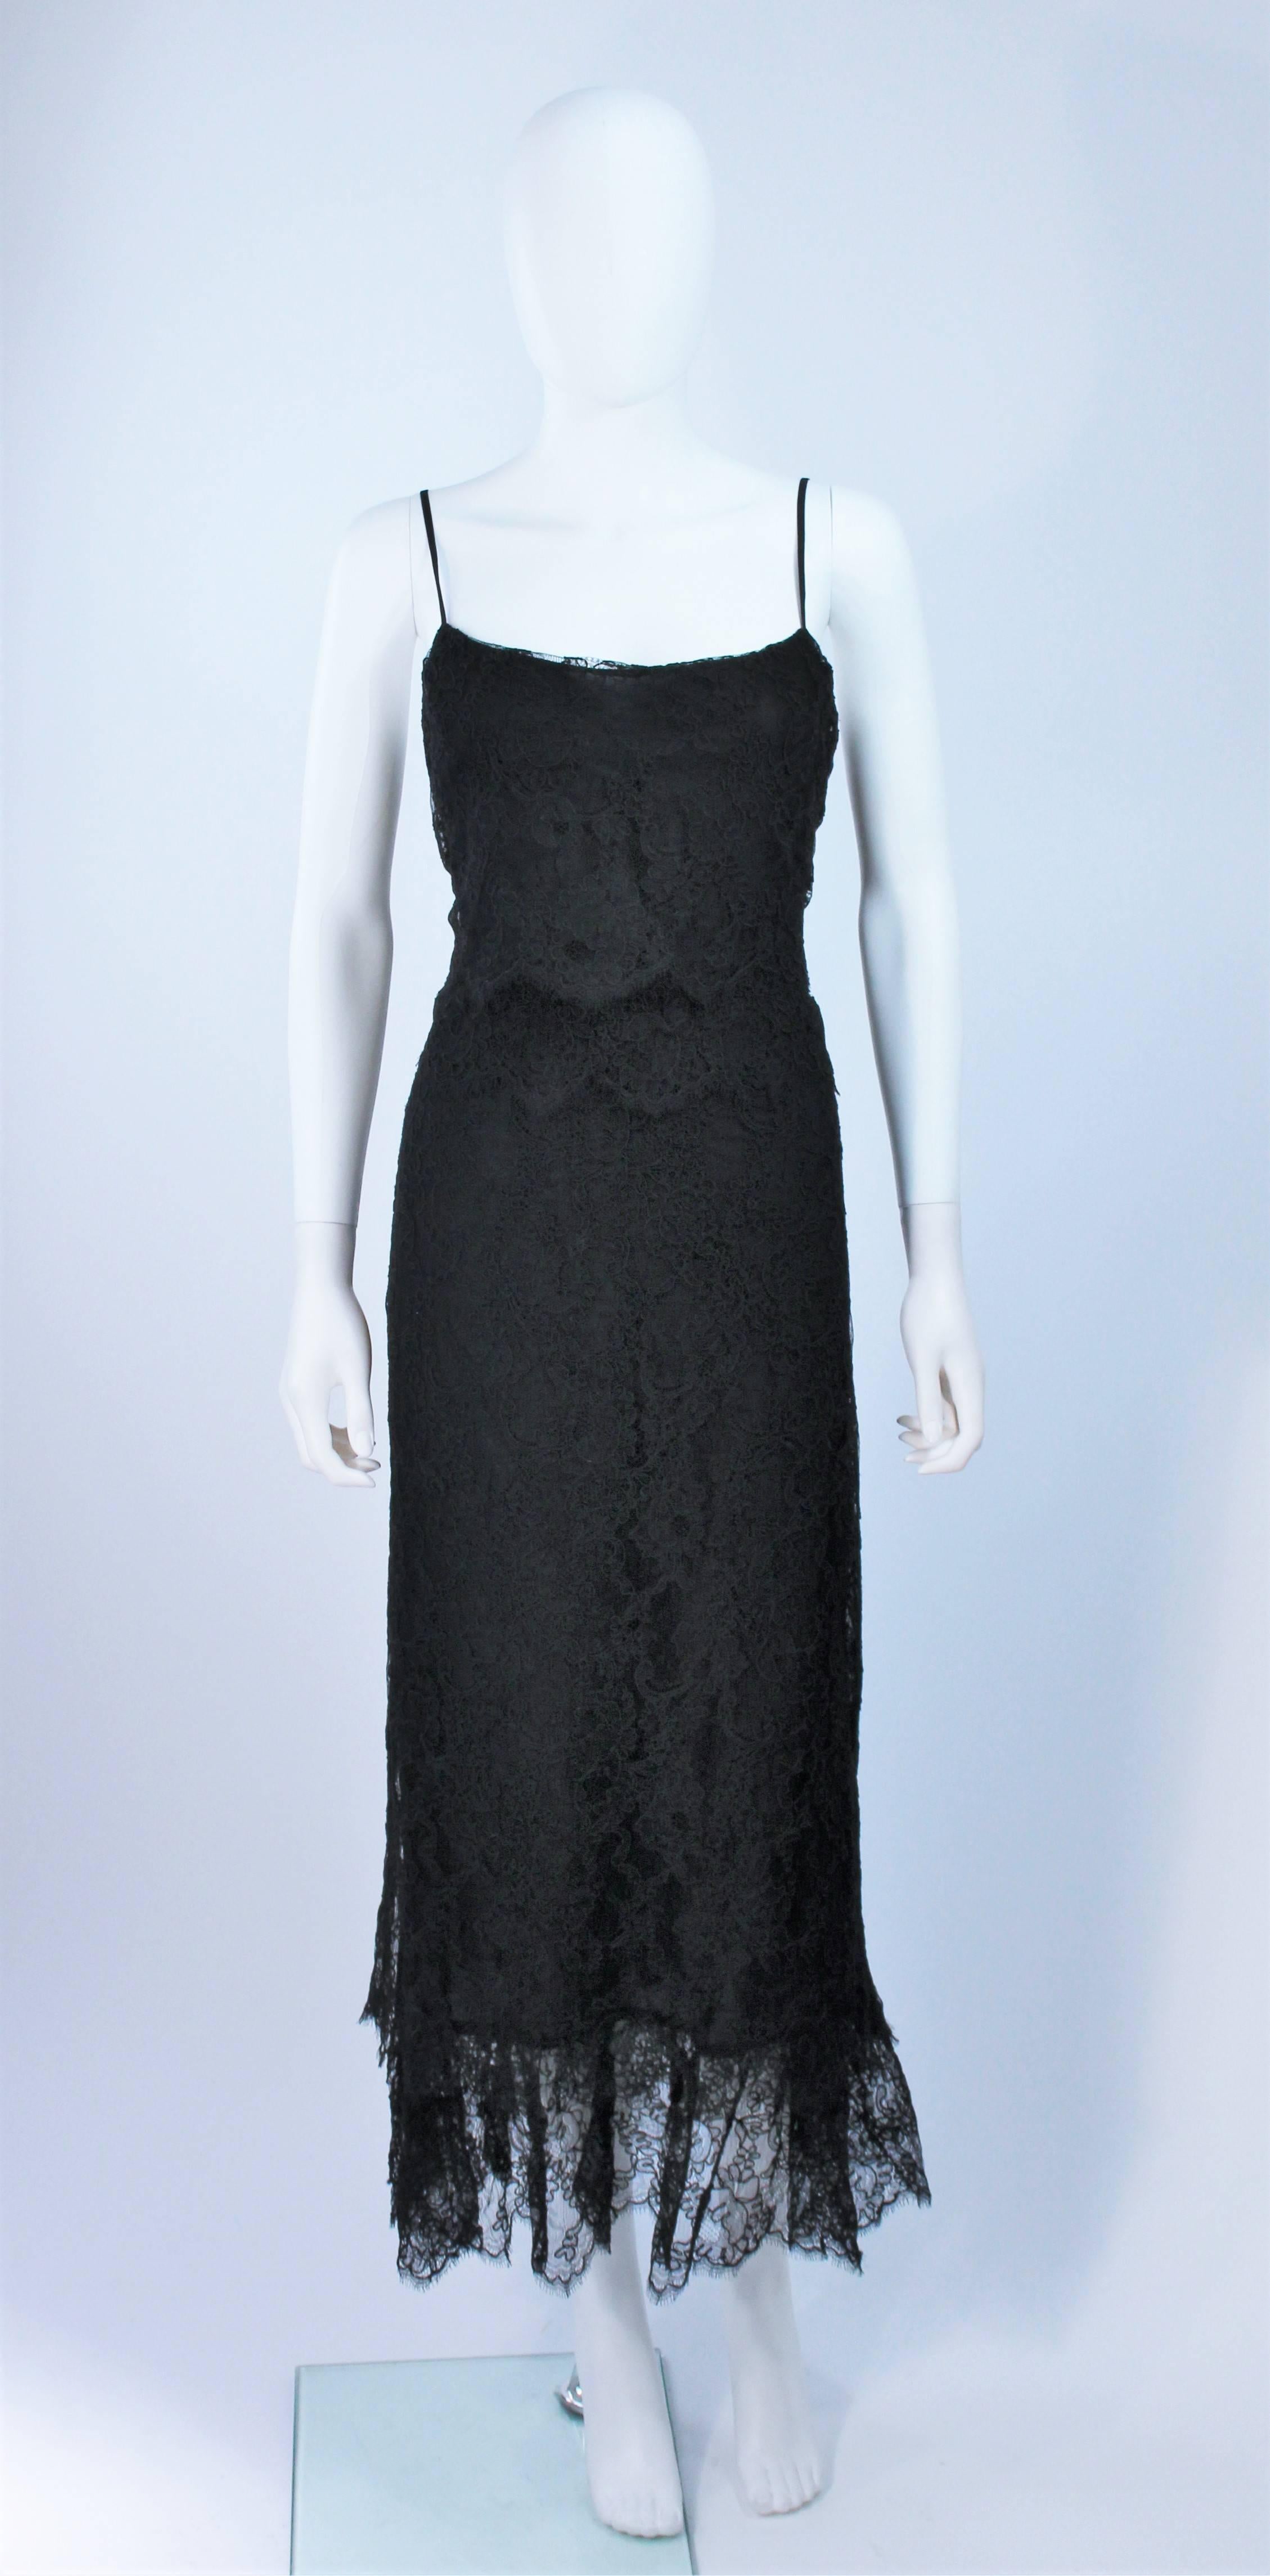  This Chanel dress is composed of an extremely supple black lace and is designed in a tiered fashion with scalloped edges. There is a center back zipper closure. In excellent vintage condition. 

**Please cross-reference measurements for personal